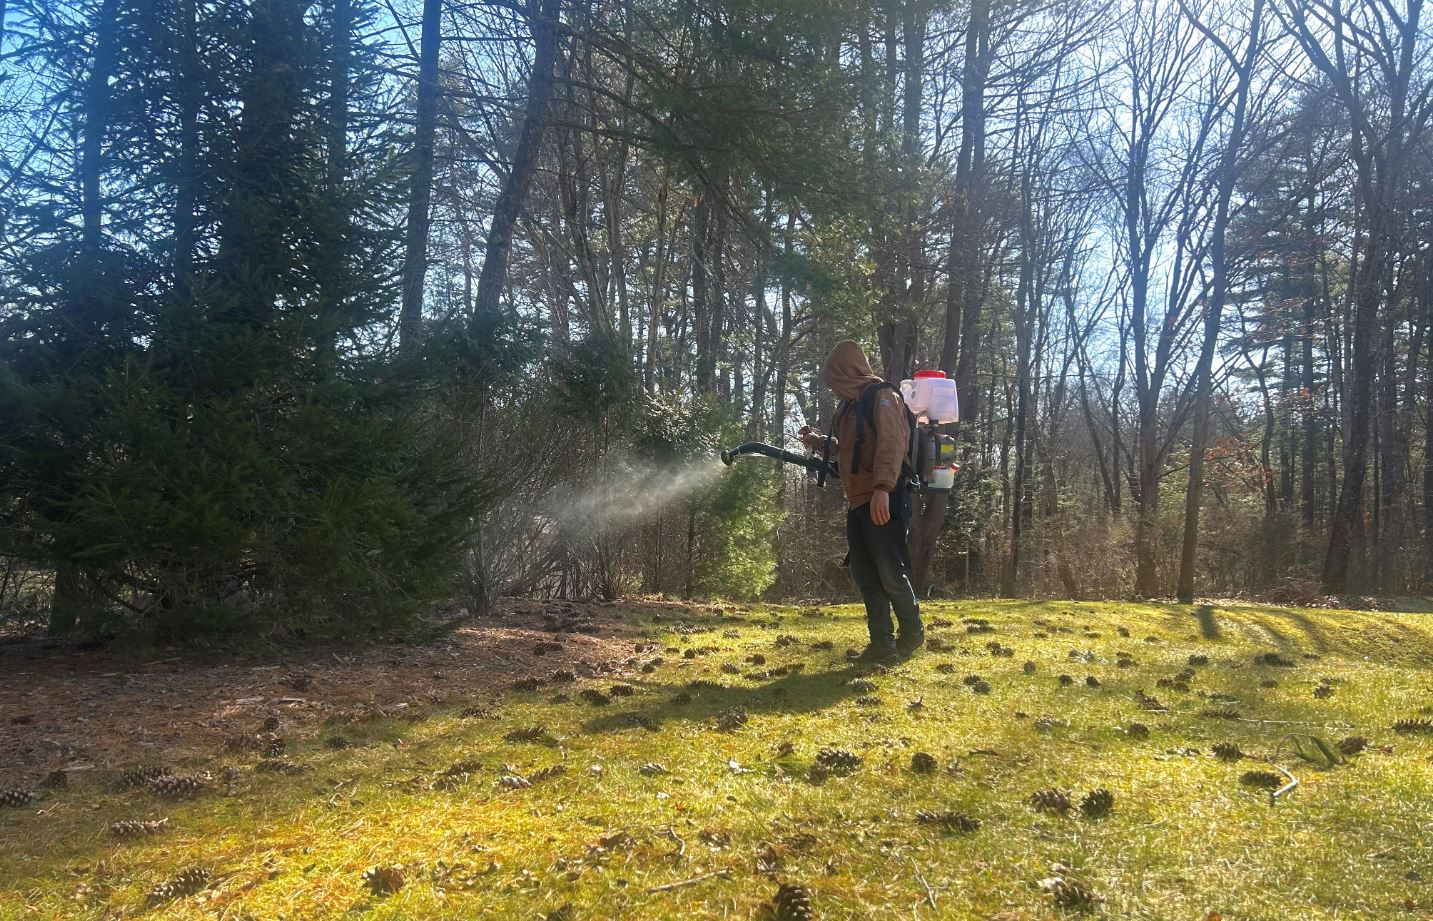 A person wearing a backpack sprayer is applying treatment to a lawn in a wooded area on a sunny day.